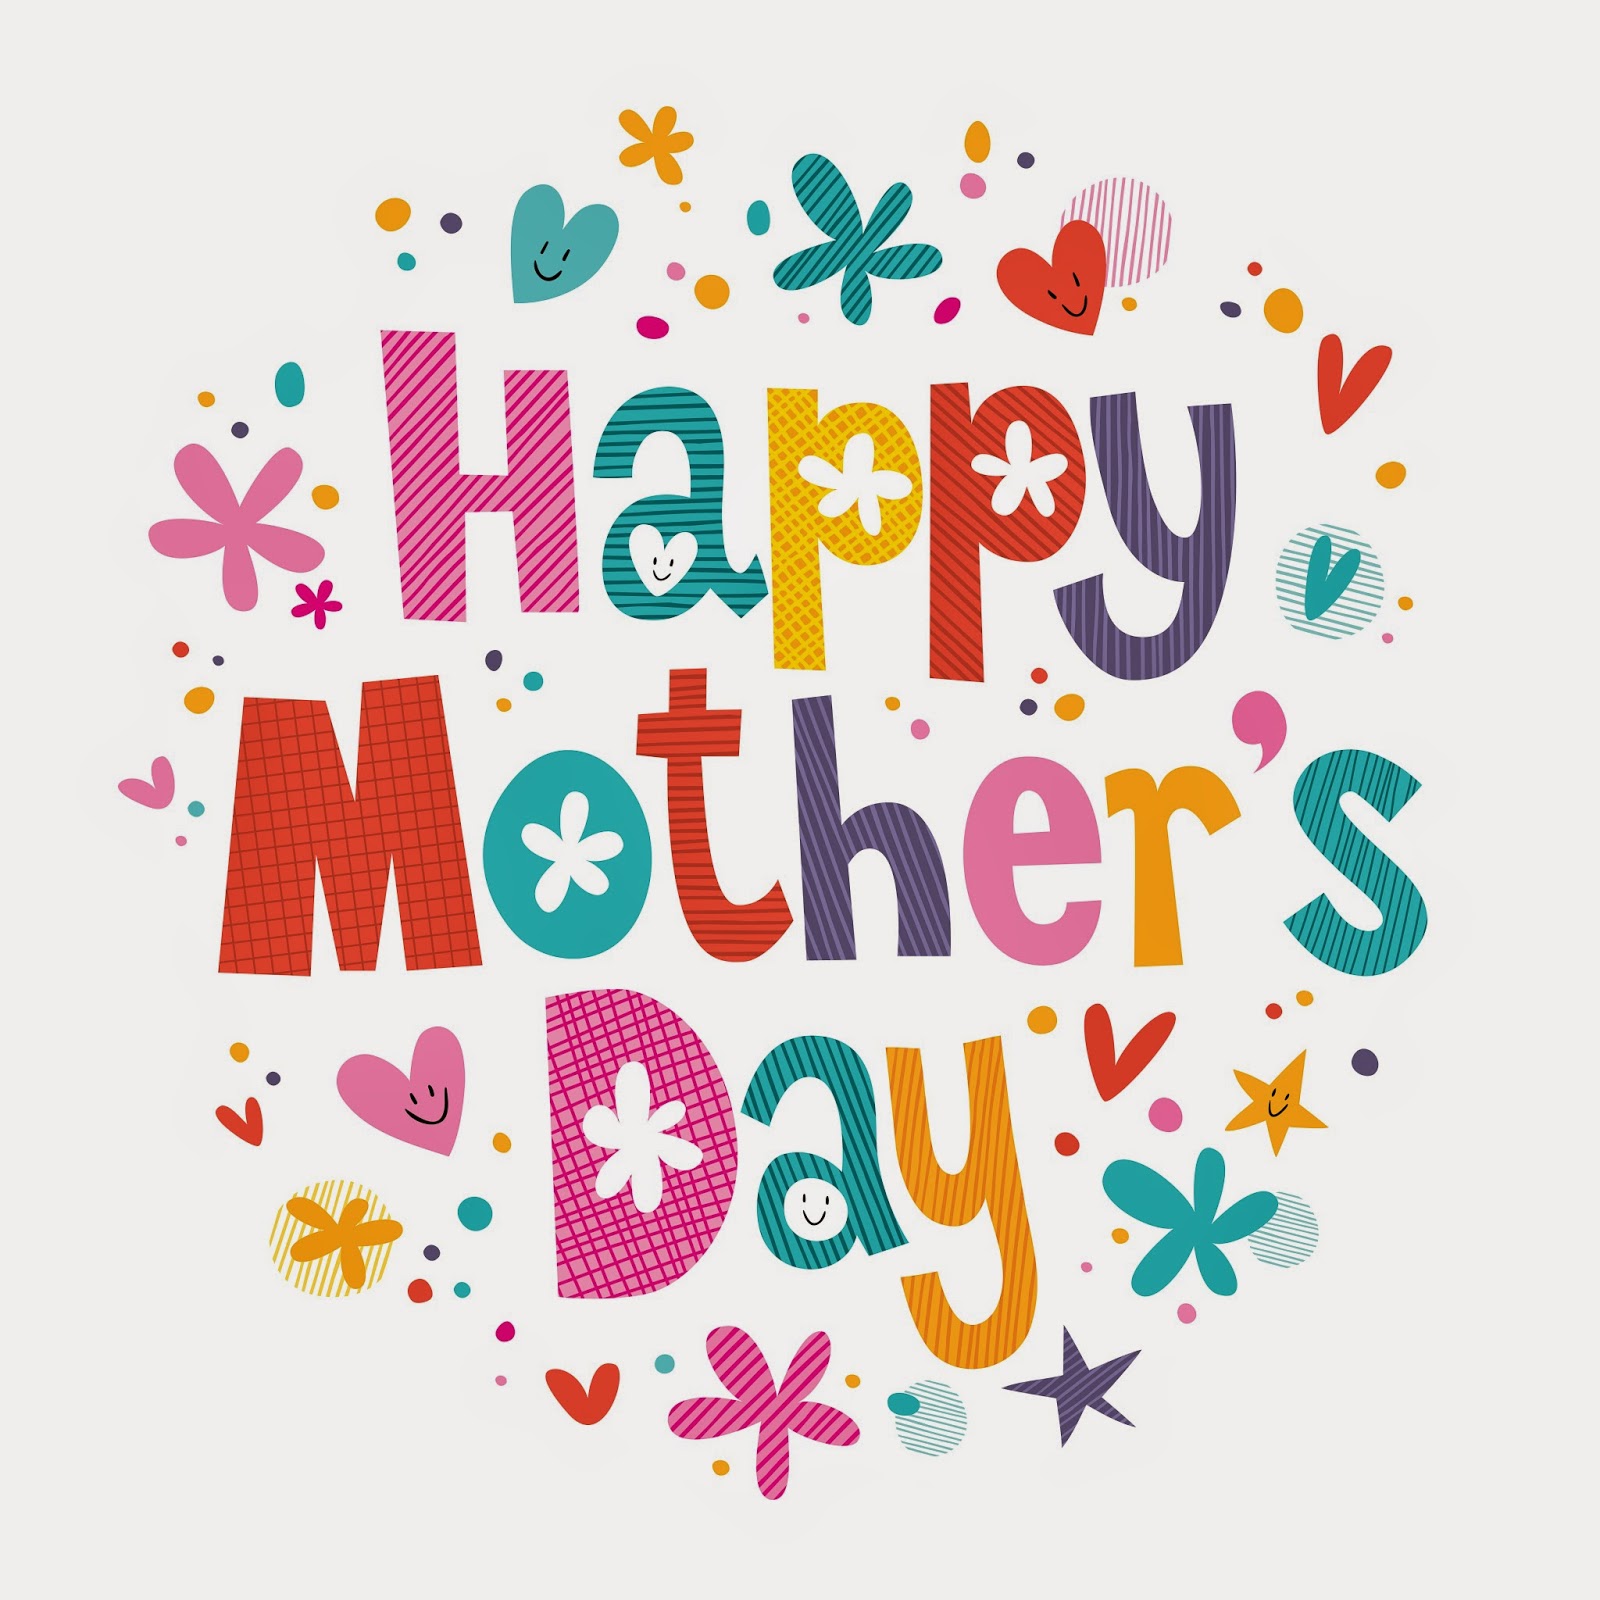 List 91+ Pictures Mother's Day 2022 Images Free Full HD, 2k, 4k